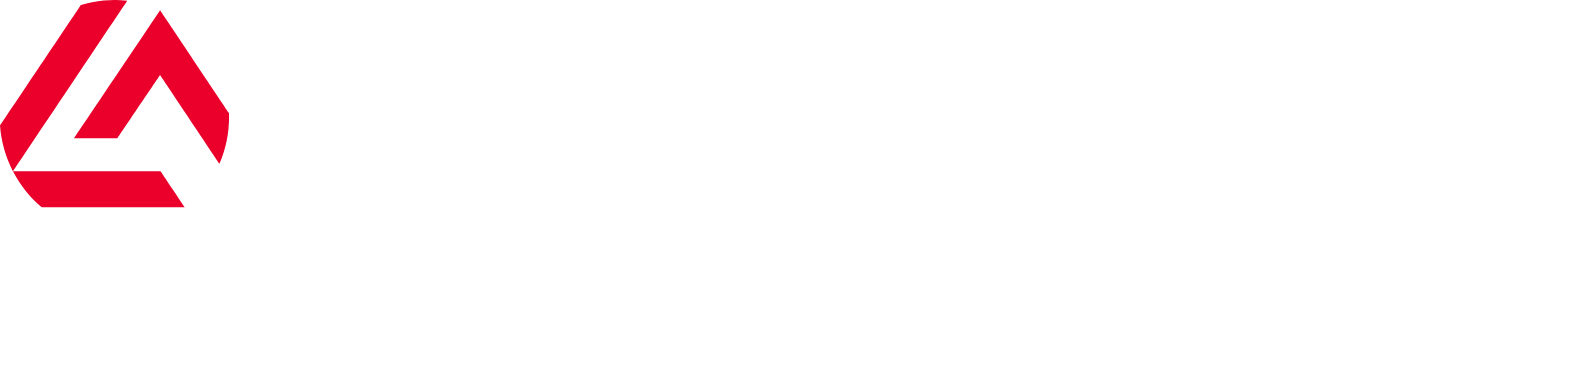 Eurobank Ergasias Services and Holdings logo large for dark backgrounds (transparent PNG)